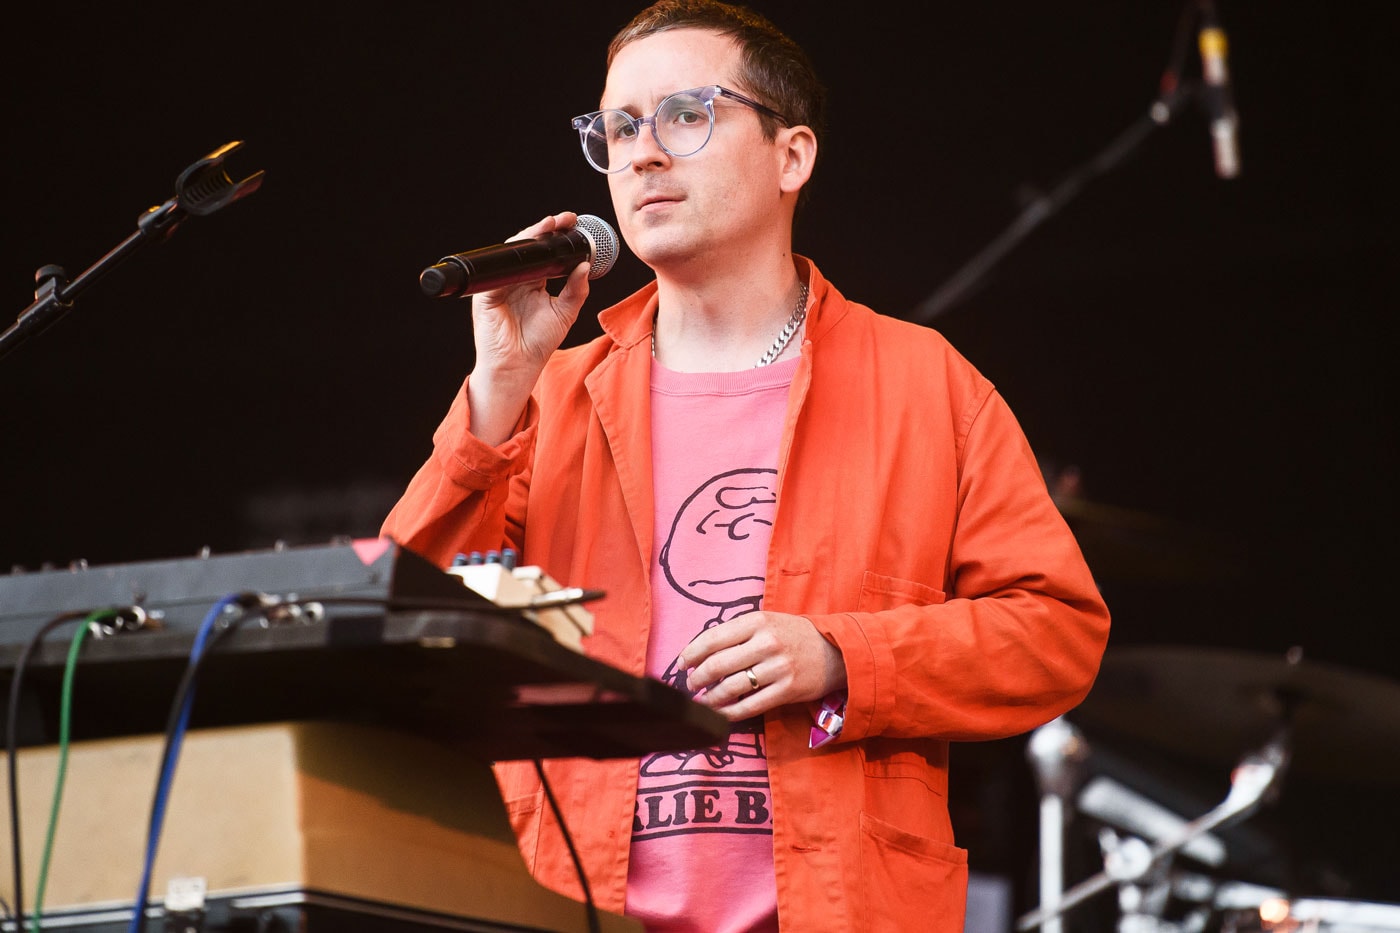 Hot Chip Covers LCD Soundsystem's "All My Friends"